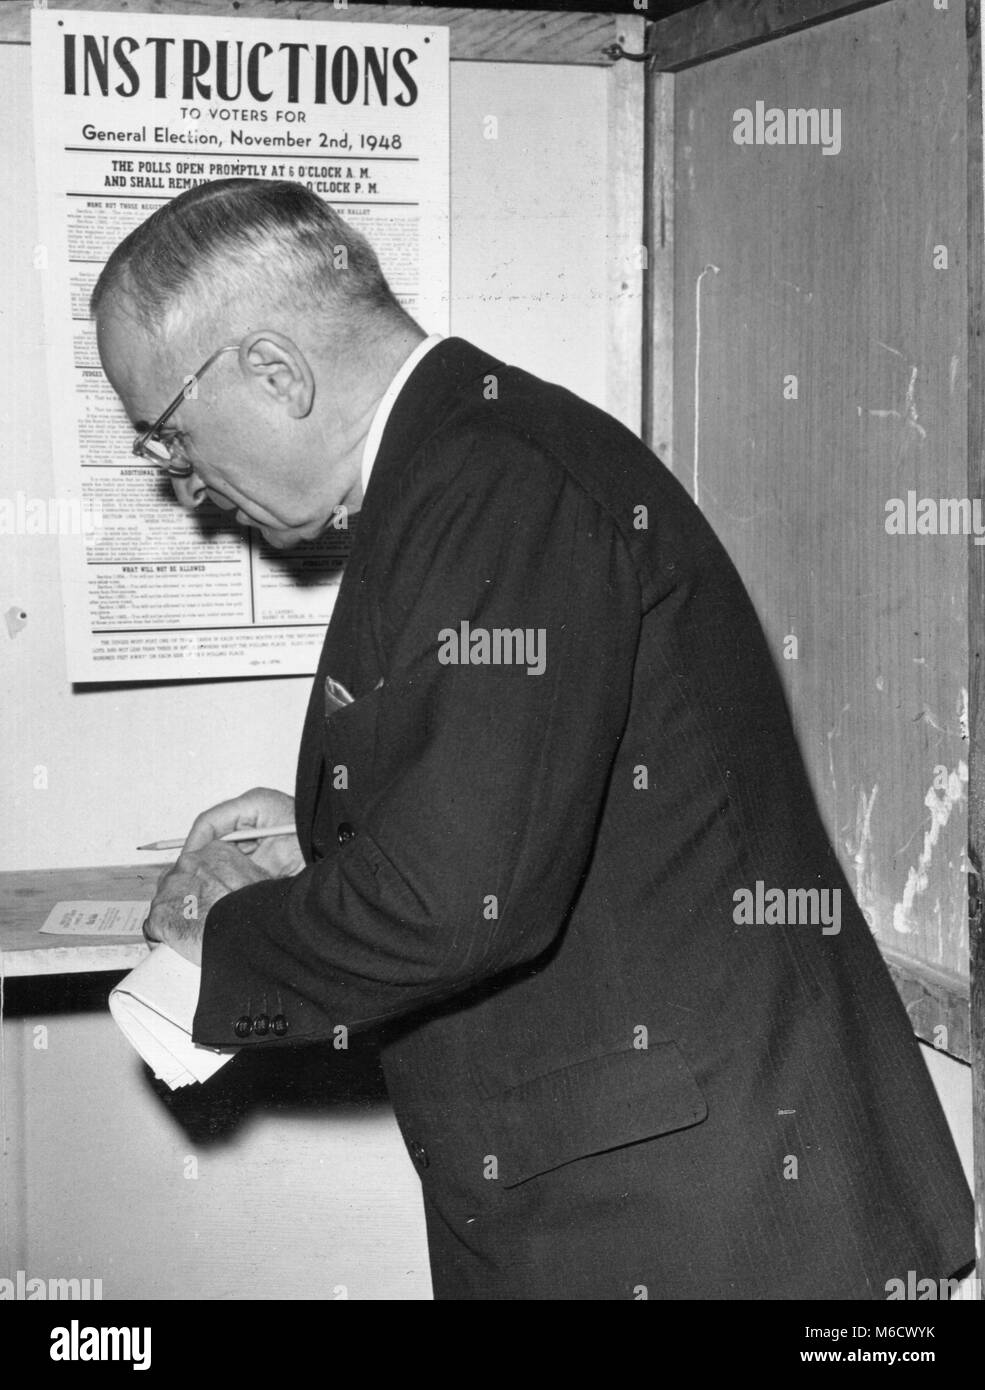 President Harry S. Truman casts his vote on Election Day. Independence, MO, 11/3/48. Stock Photo